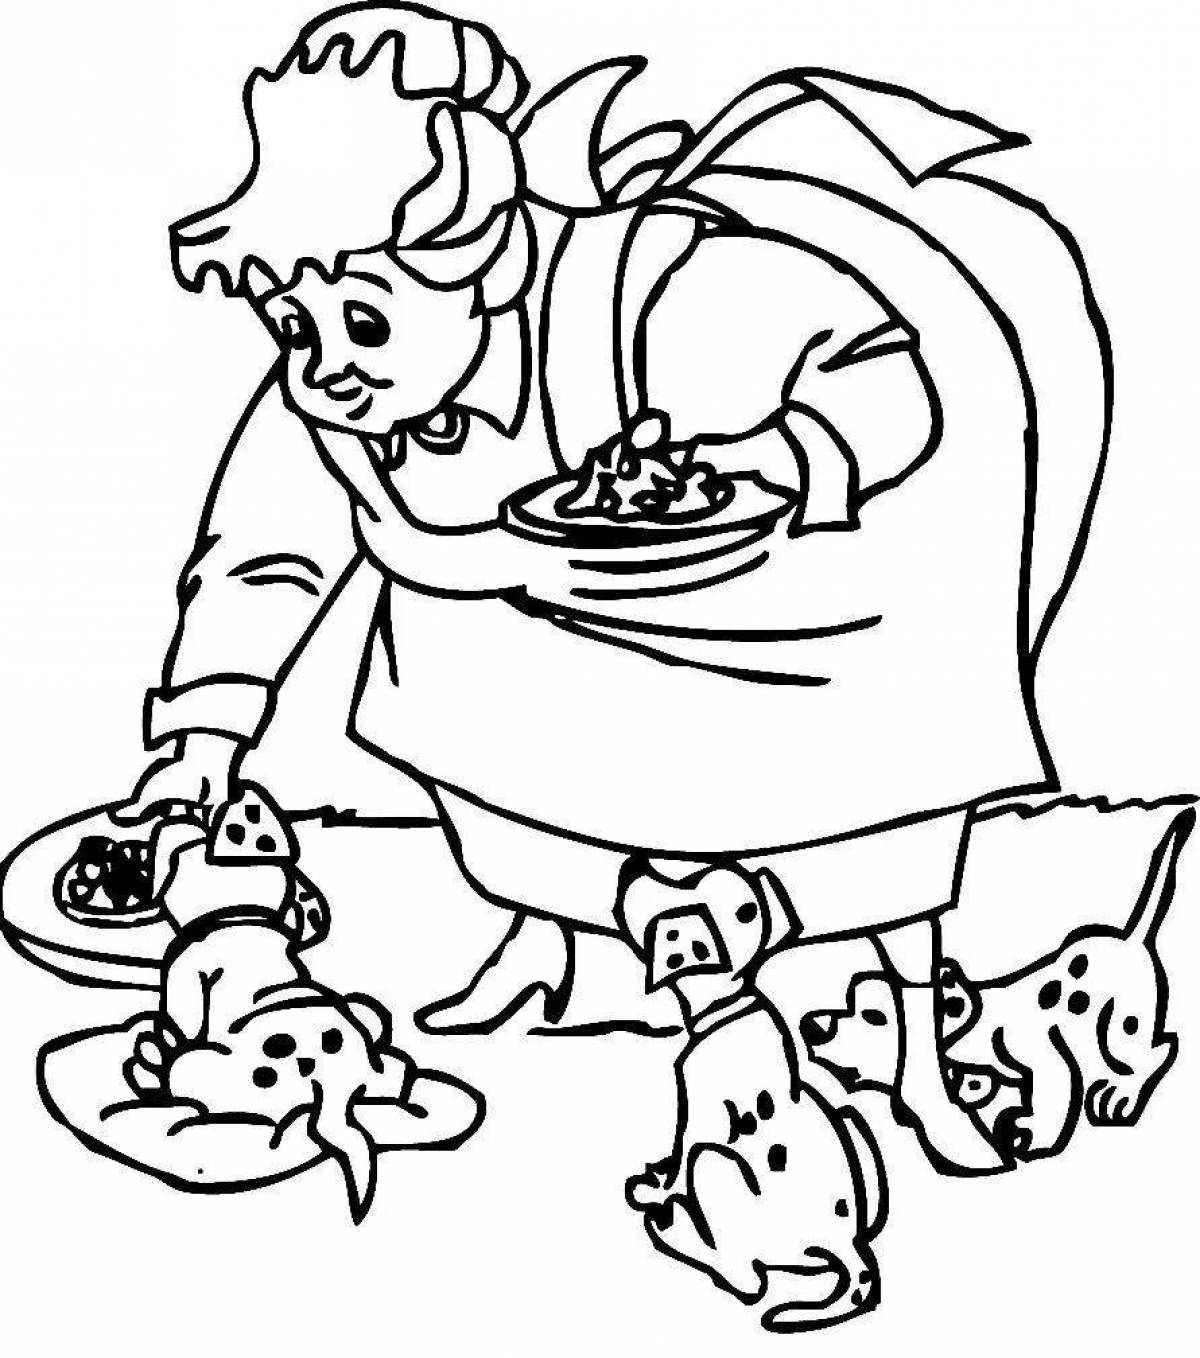 Coloring page beautiful good deeds